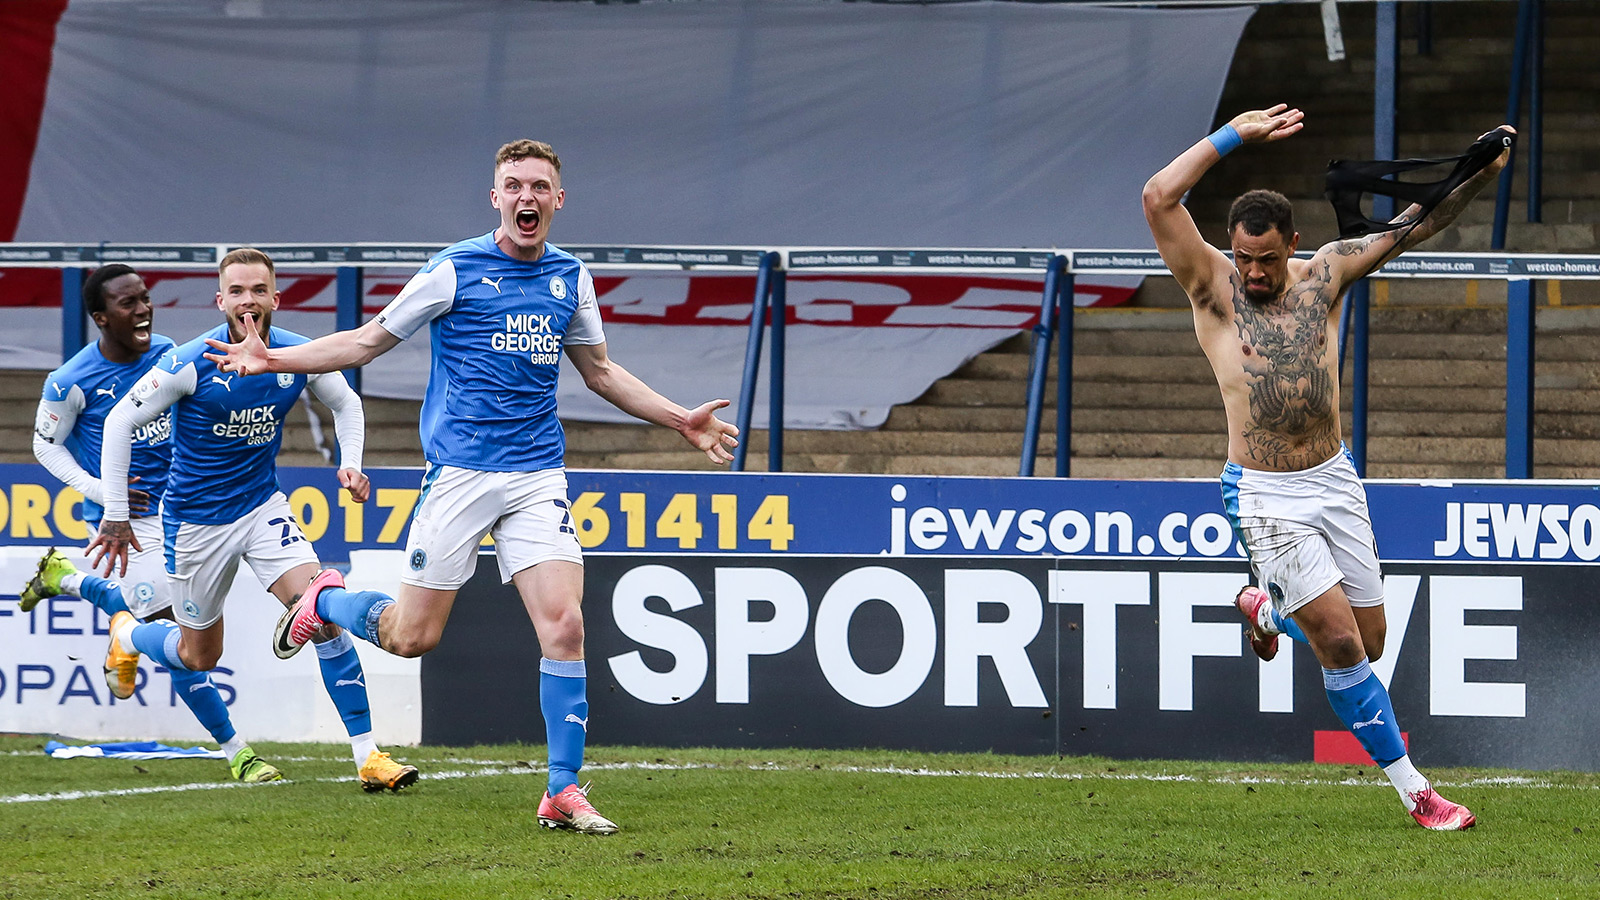 1st May '21 | 1st May 2021 the day Posh secured promotion thanks to a dramatic late penalty from Jonson Clarke-Harris